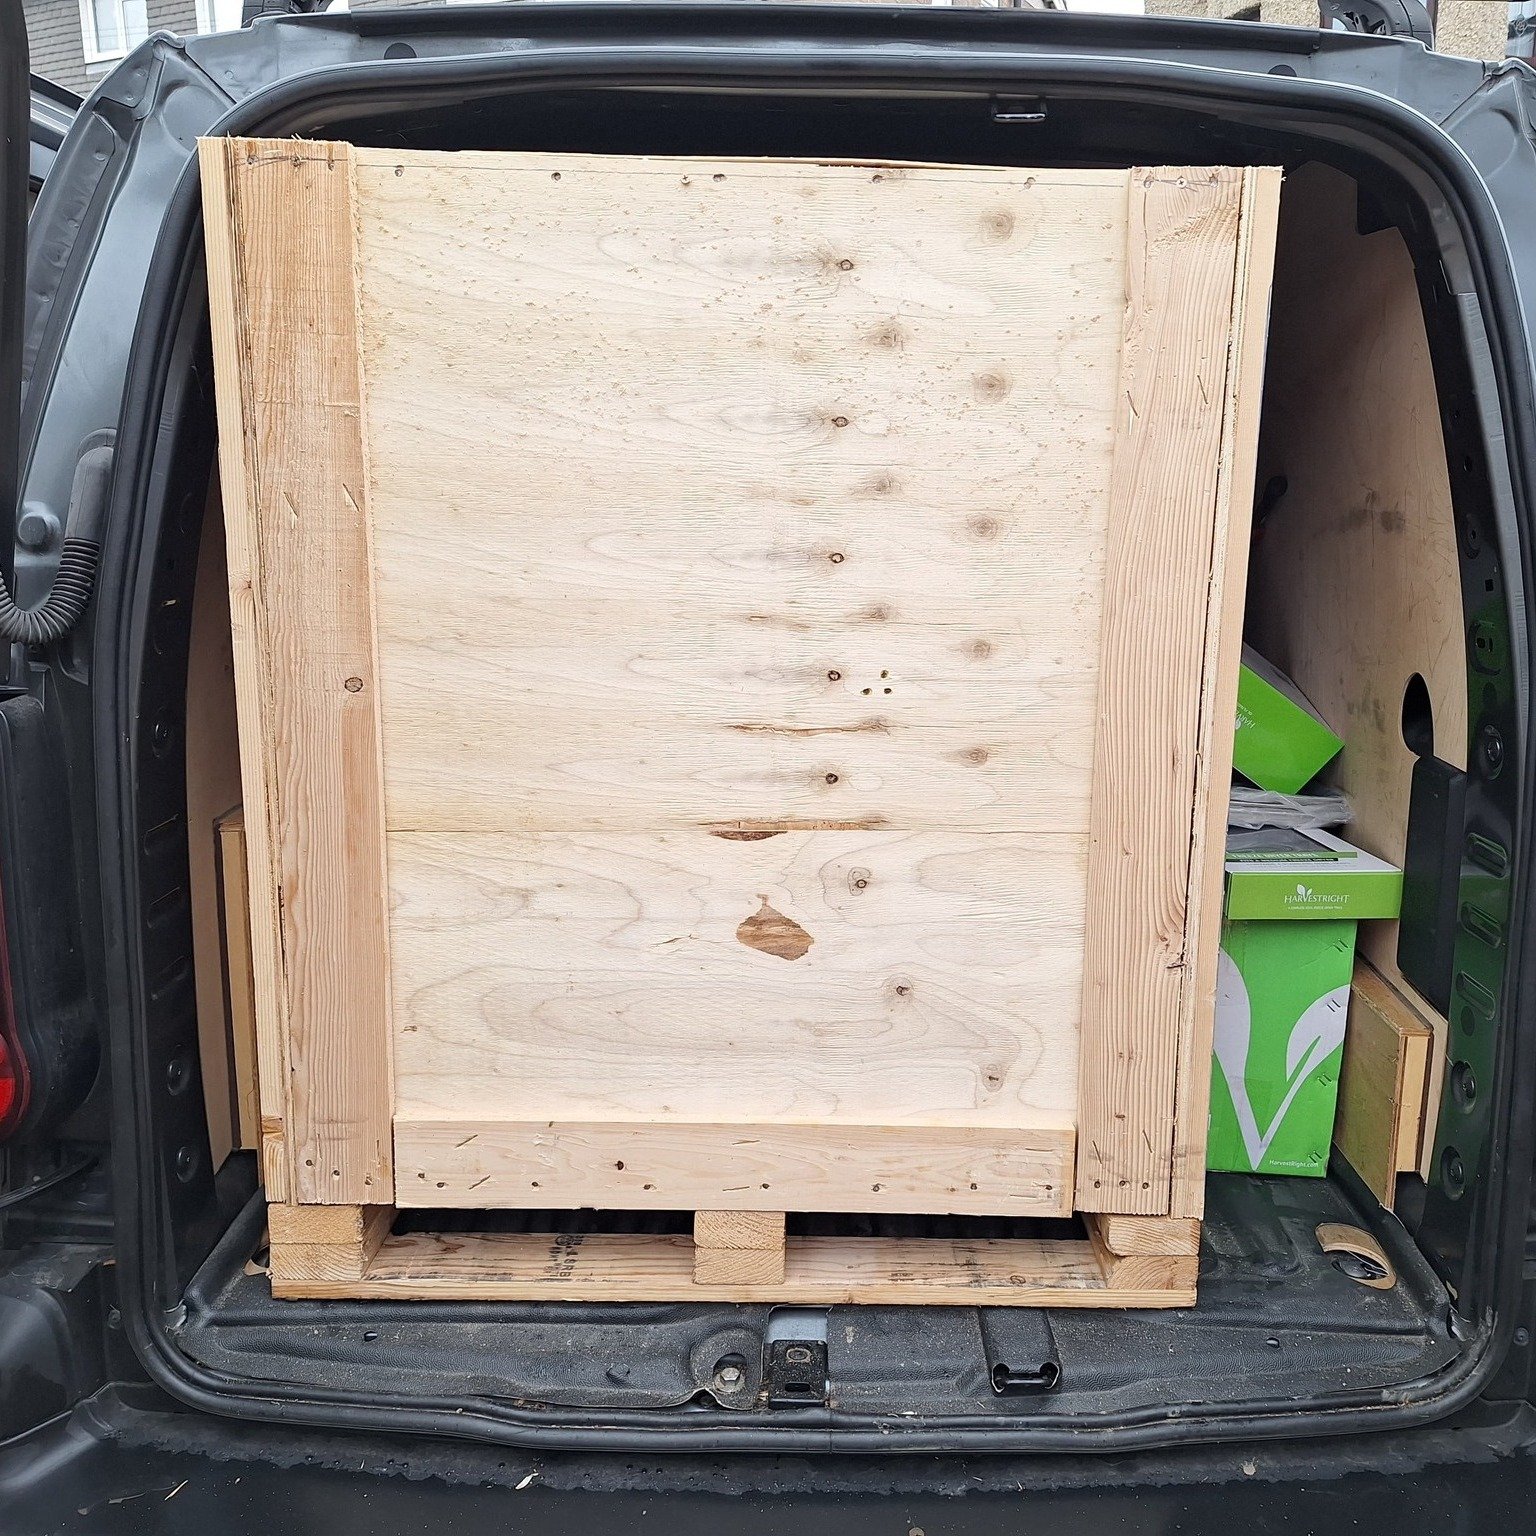 Two #harvestrightfreezedryers squeezed into one small van! We cut the crates down prior to collection for another happy customer. #harvestrightfreezedryer #freezedryer #harvestright